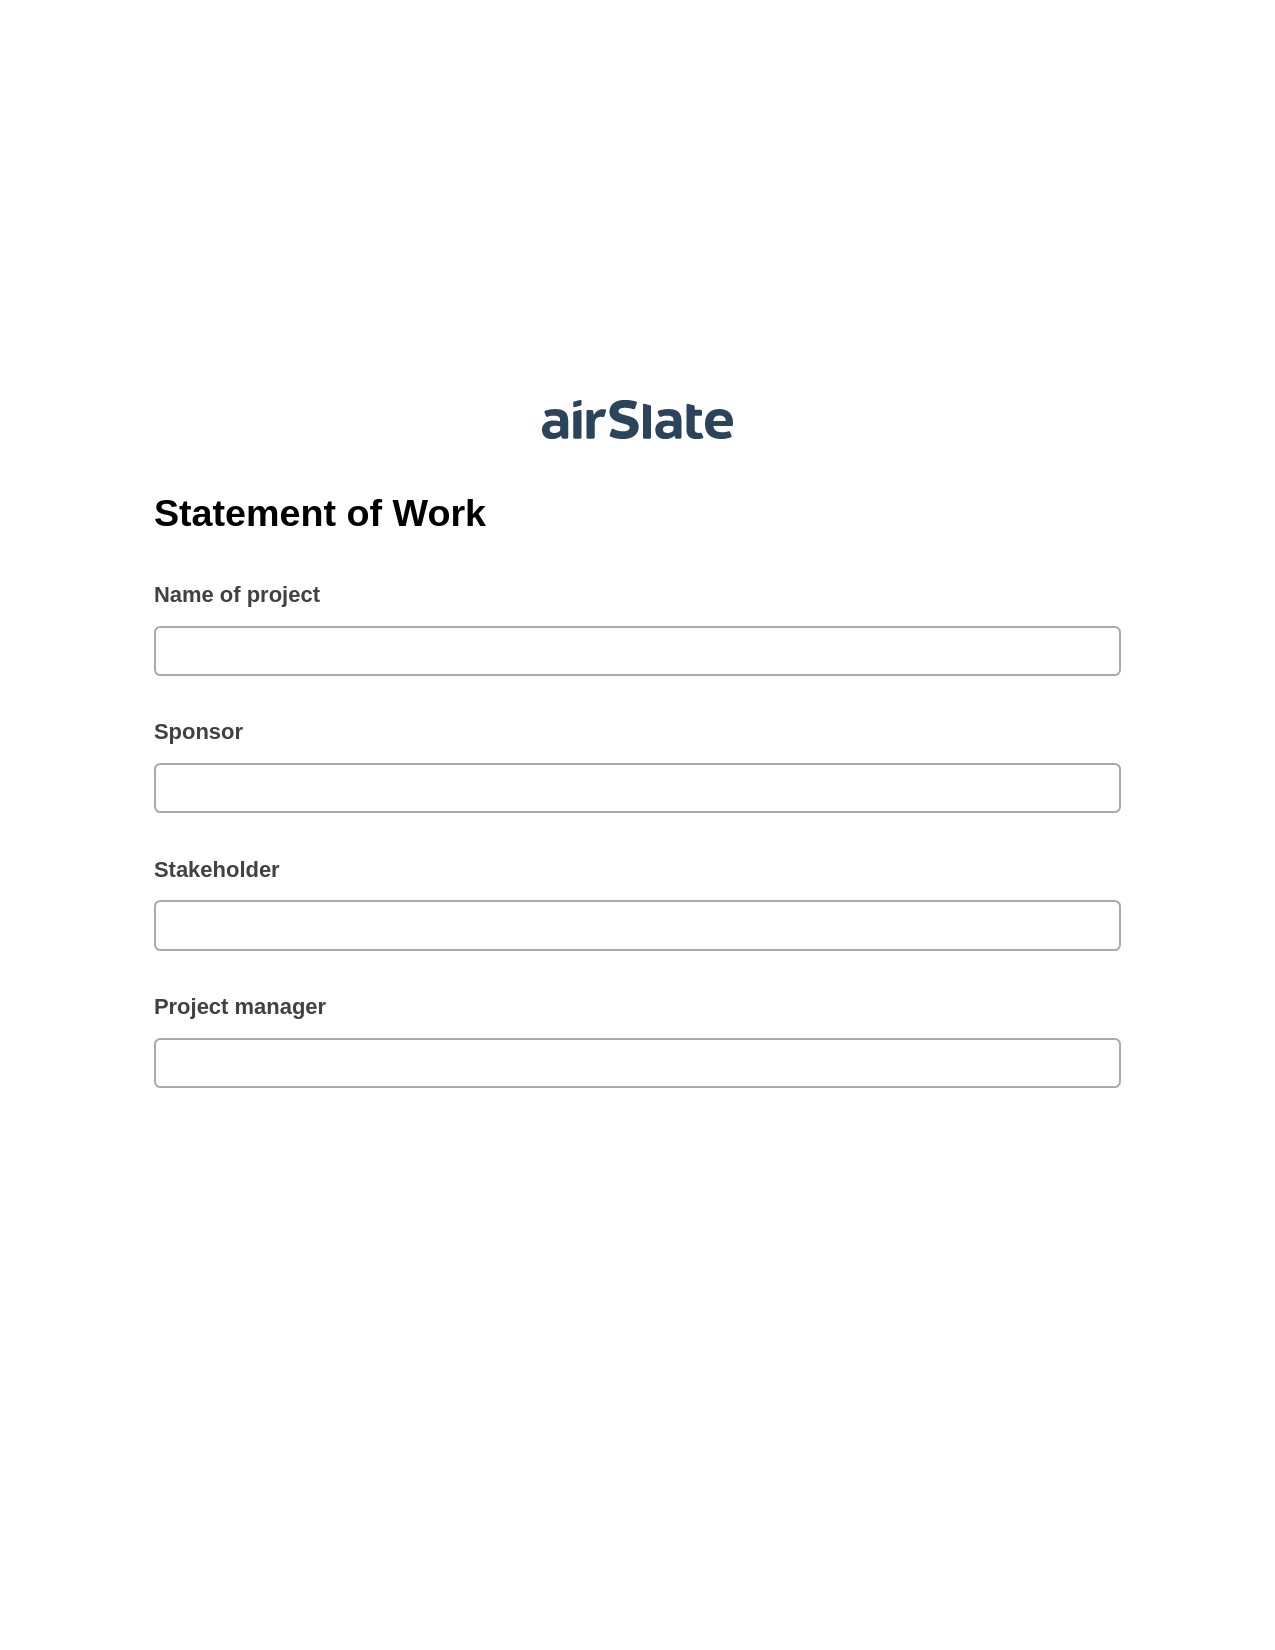 Statement of Work Pre-fill from Excel Spreadsheet Dropdown Options Bot, Send a Slate to Salesforce Contact Bot, Email Notification Postfinish Bot